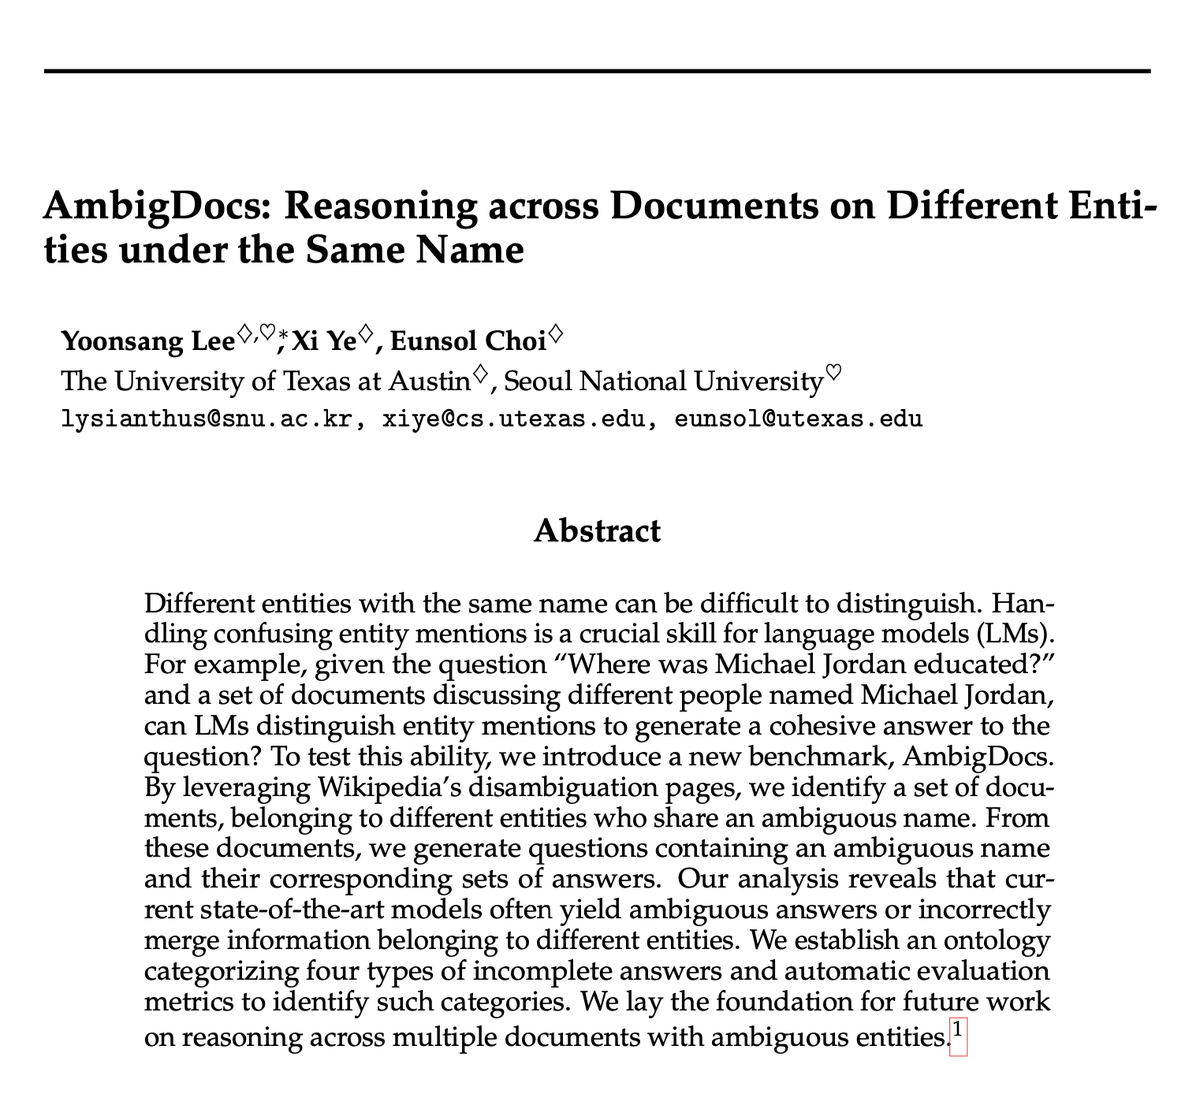 Can LMs correctly distinguish🔎 confusing entity mentions in multiple documents? We study how current LMs perform QA task when provided ambiguous questions and a document set📚 that requires challenging entity disambiguation. Work done at @UTCompSci✨ w/ @xiye_nlp, @eunsolc